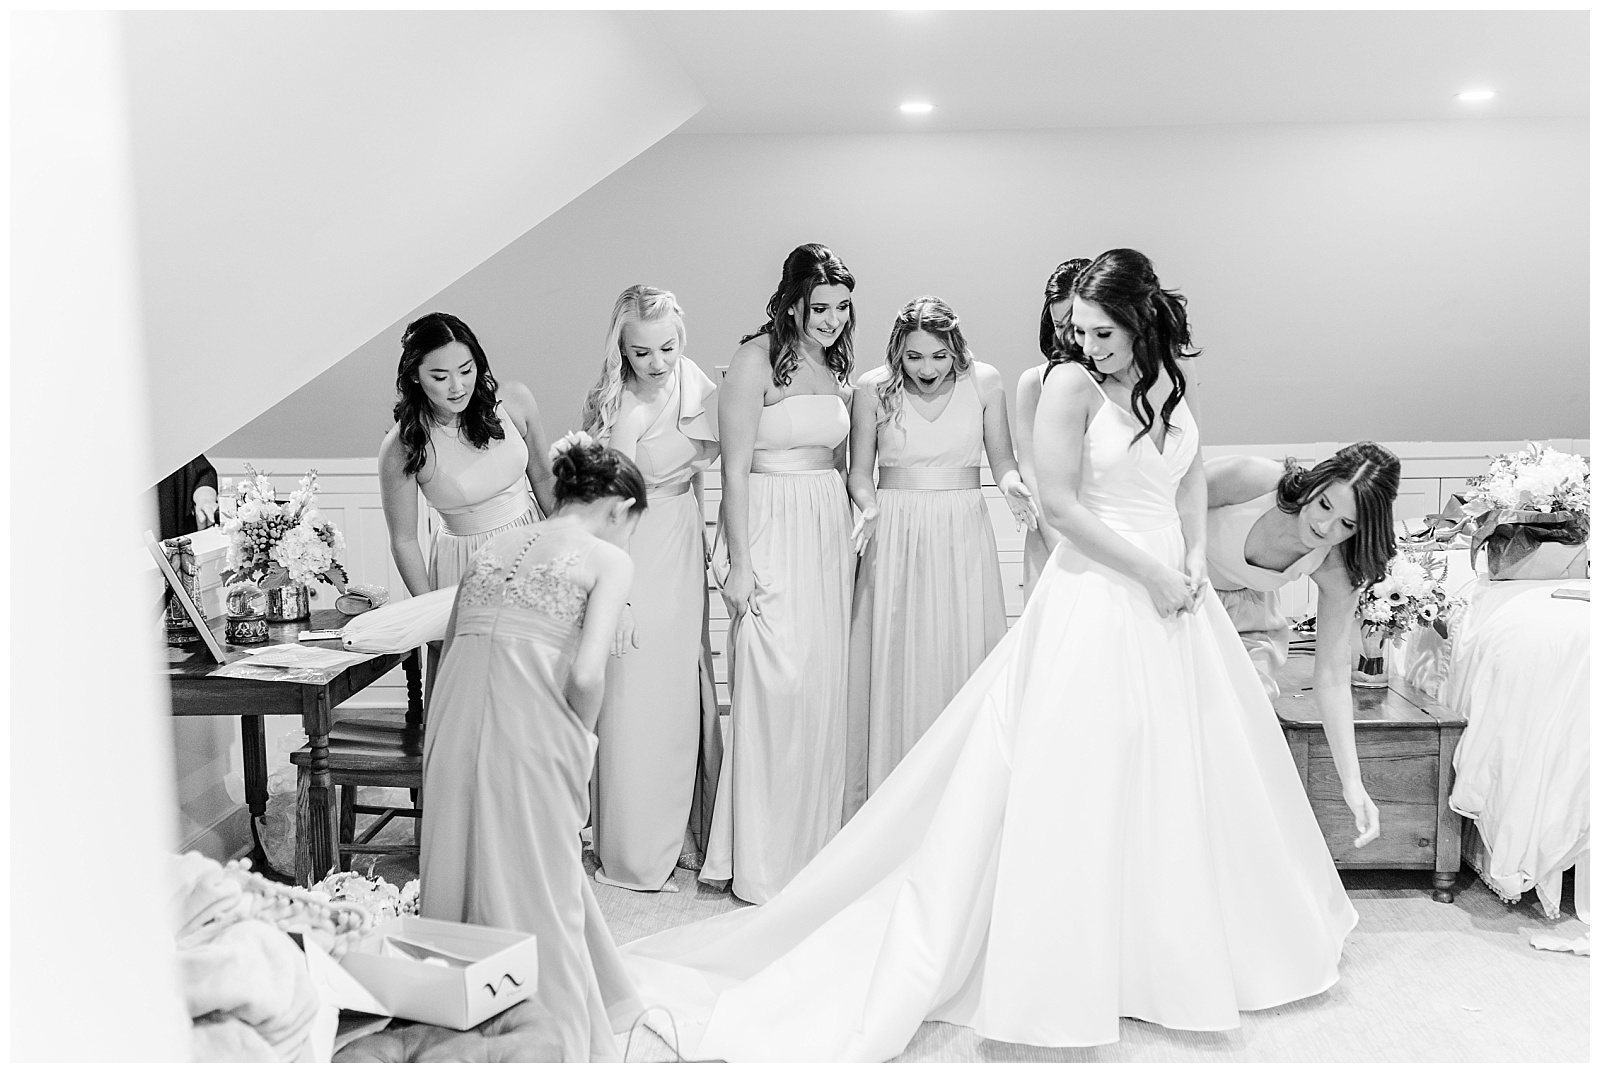 bridesmaids help bride button the back of her wedding dress with long train